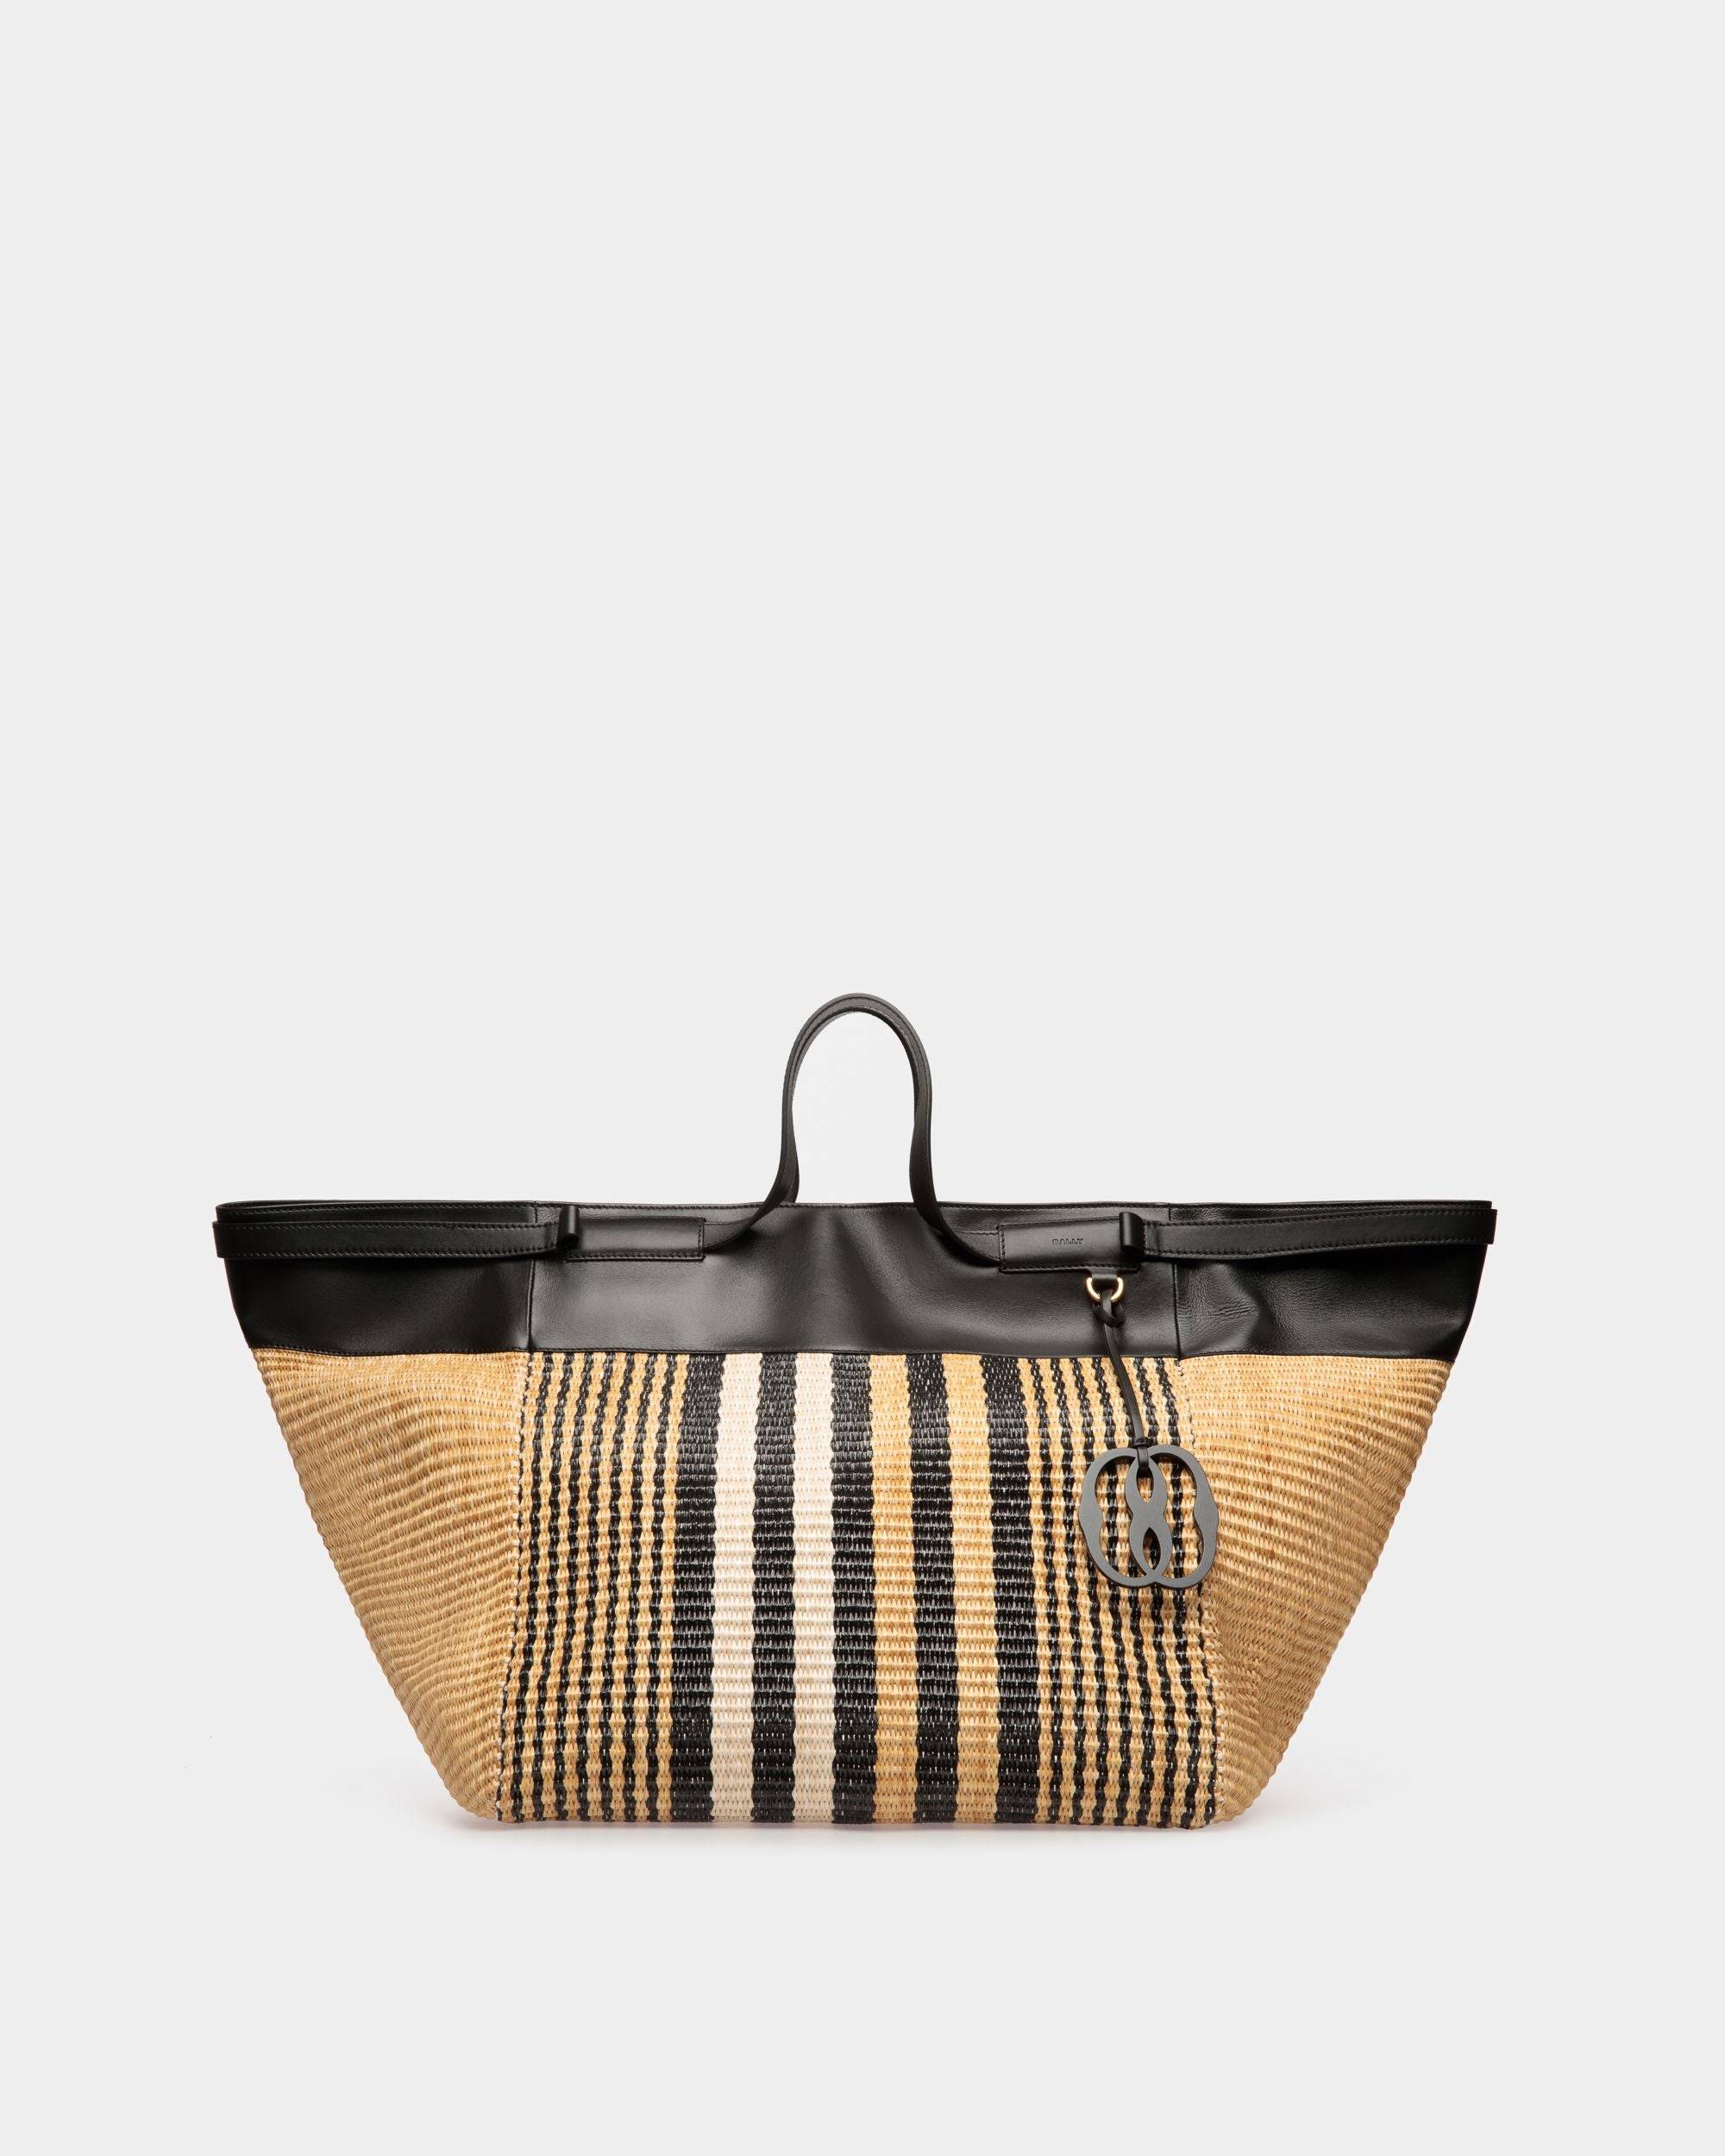 Billboard Tote In Natural And Black Fabric - Bally - 01